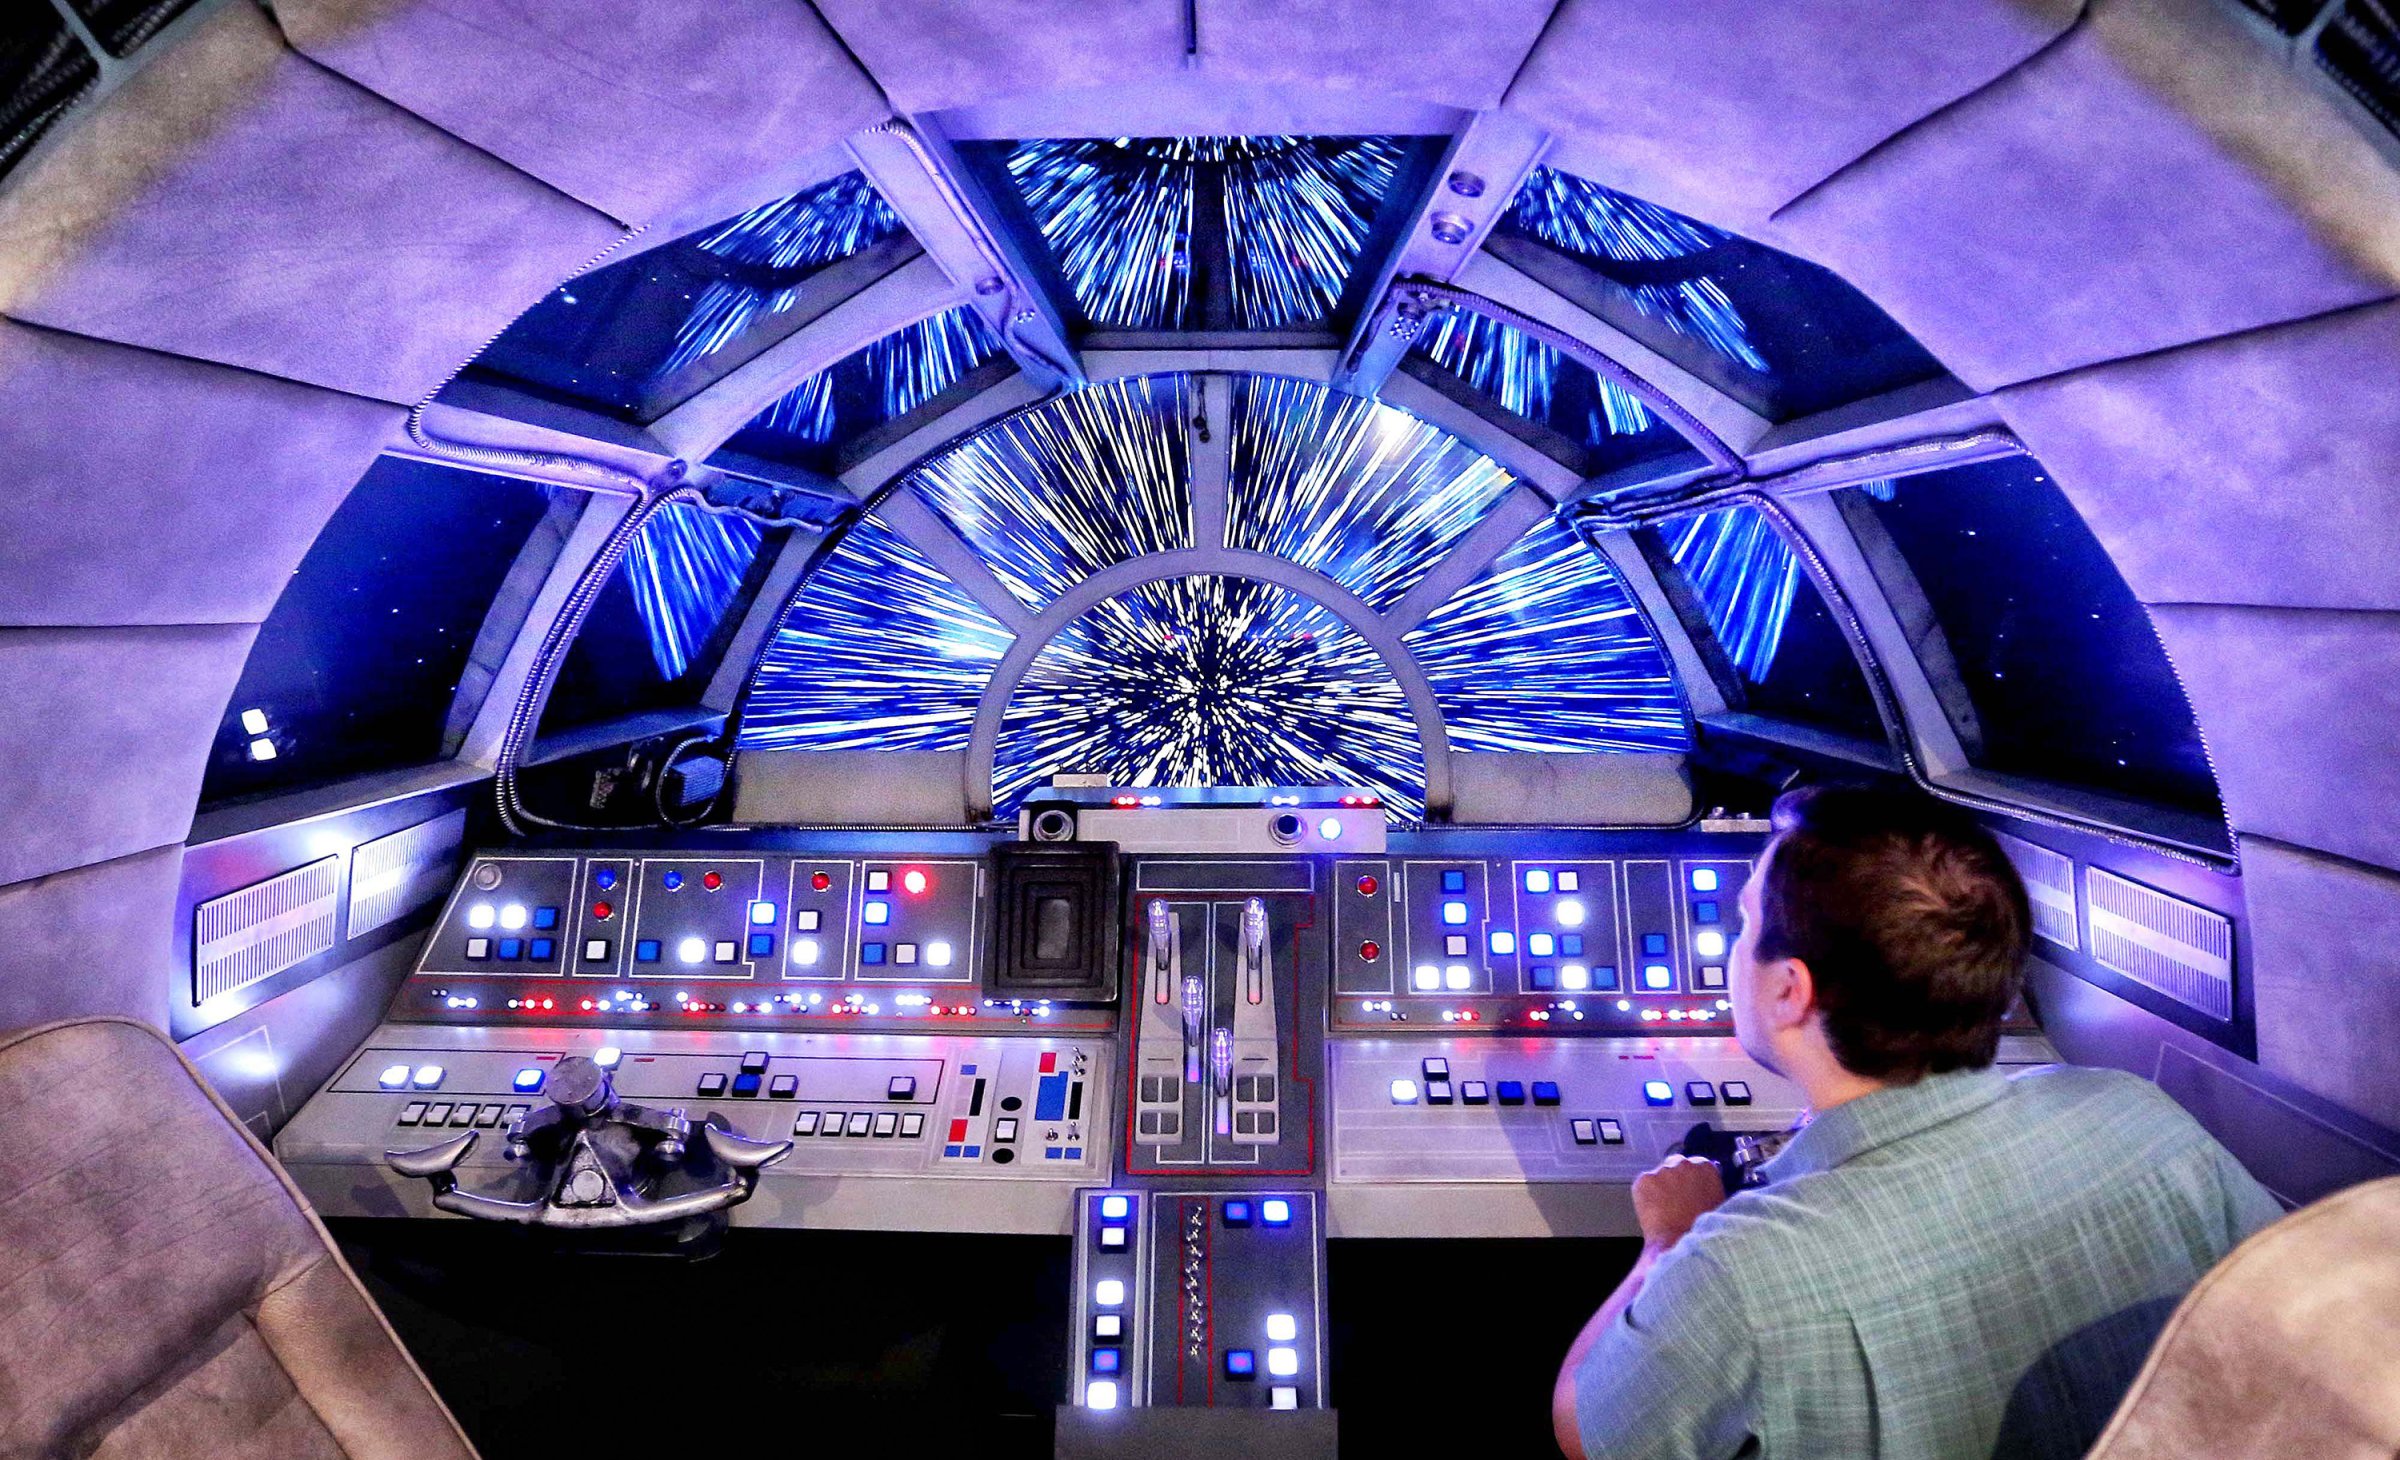 Danny Handke, a creative design executive with Walt Disney Imagineering, demonstrates the hyper reality of the cockpit in the new Star Wars Millennium Falcon play area onboard the Disney Dream, as Disney Cruise Lines unveils the enhancements to the ship on Oct. 30, 2015.